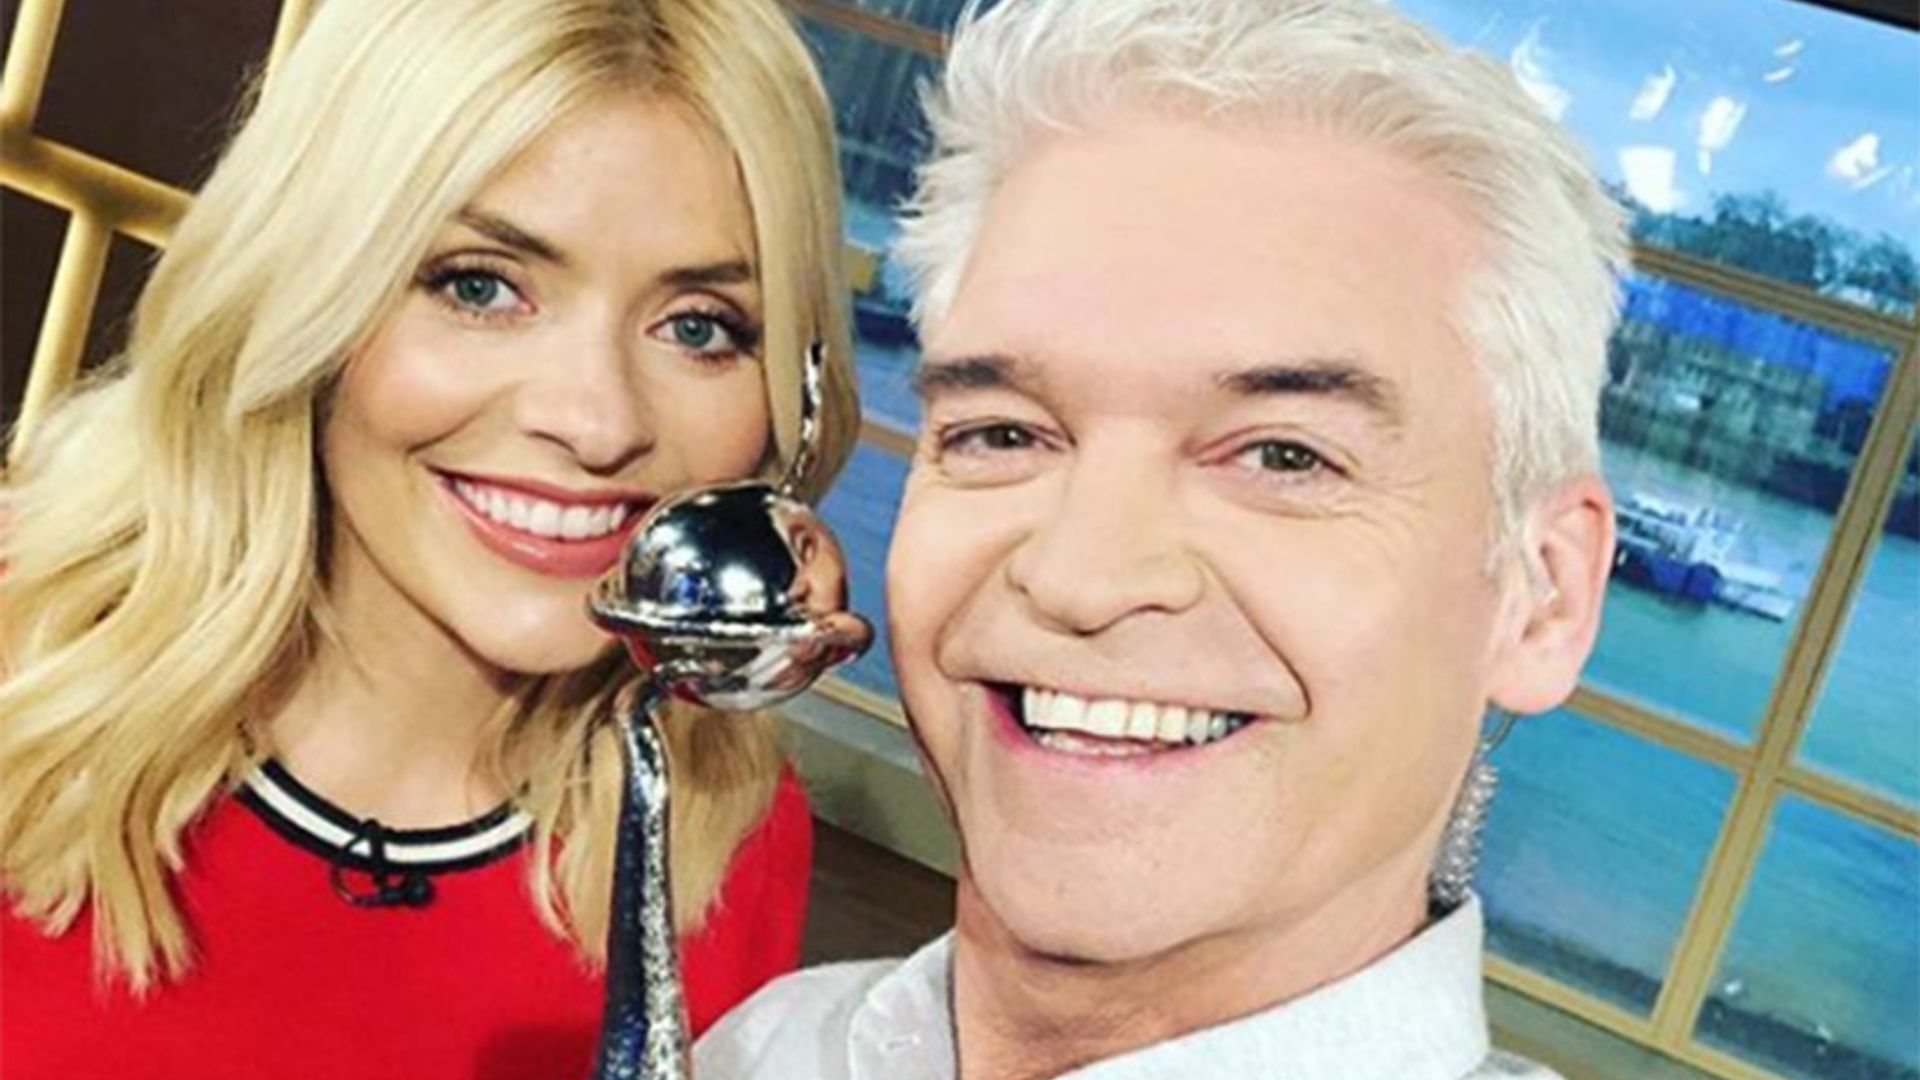 Holly Willoughby and Phillip Schofield hungover on This Morning (again)!